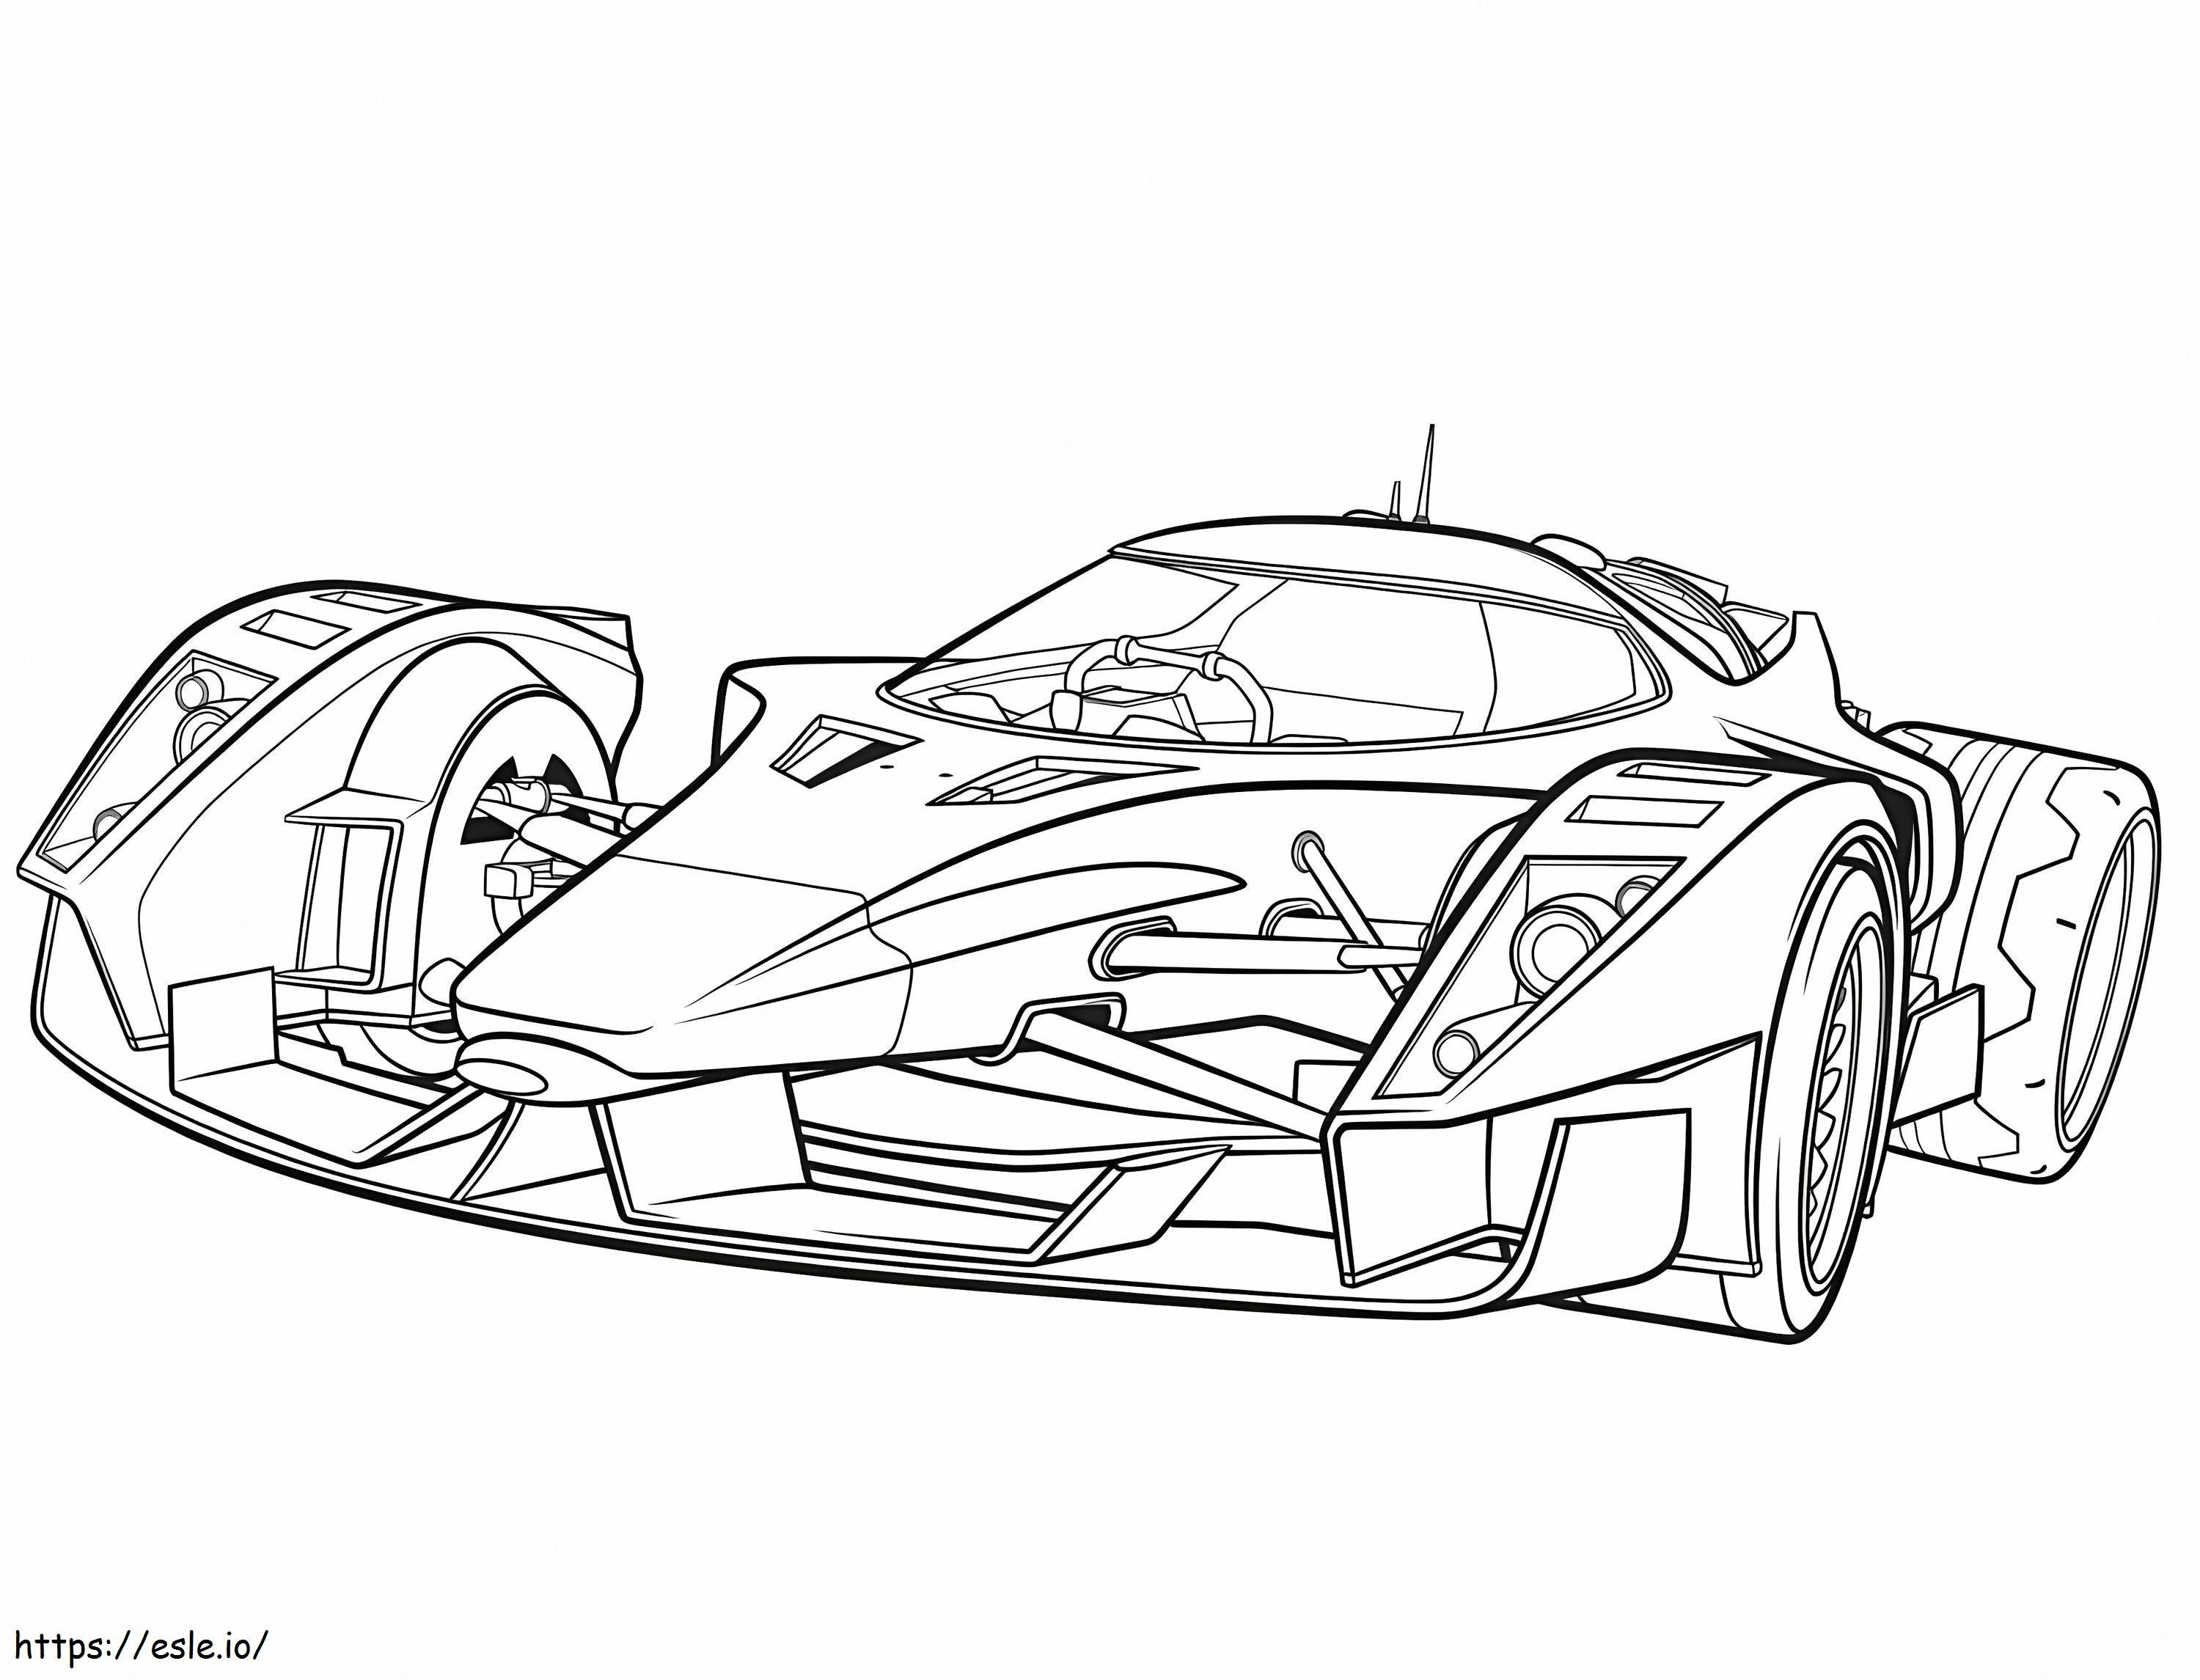 Racing Car 2 coloring page